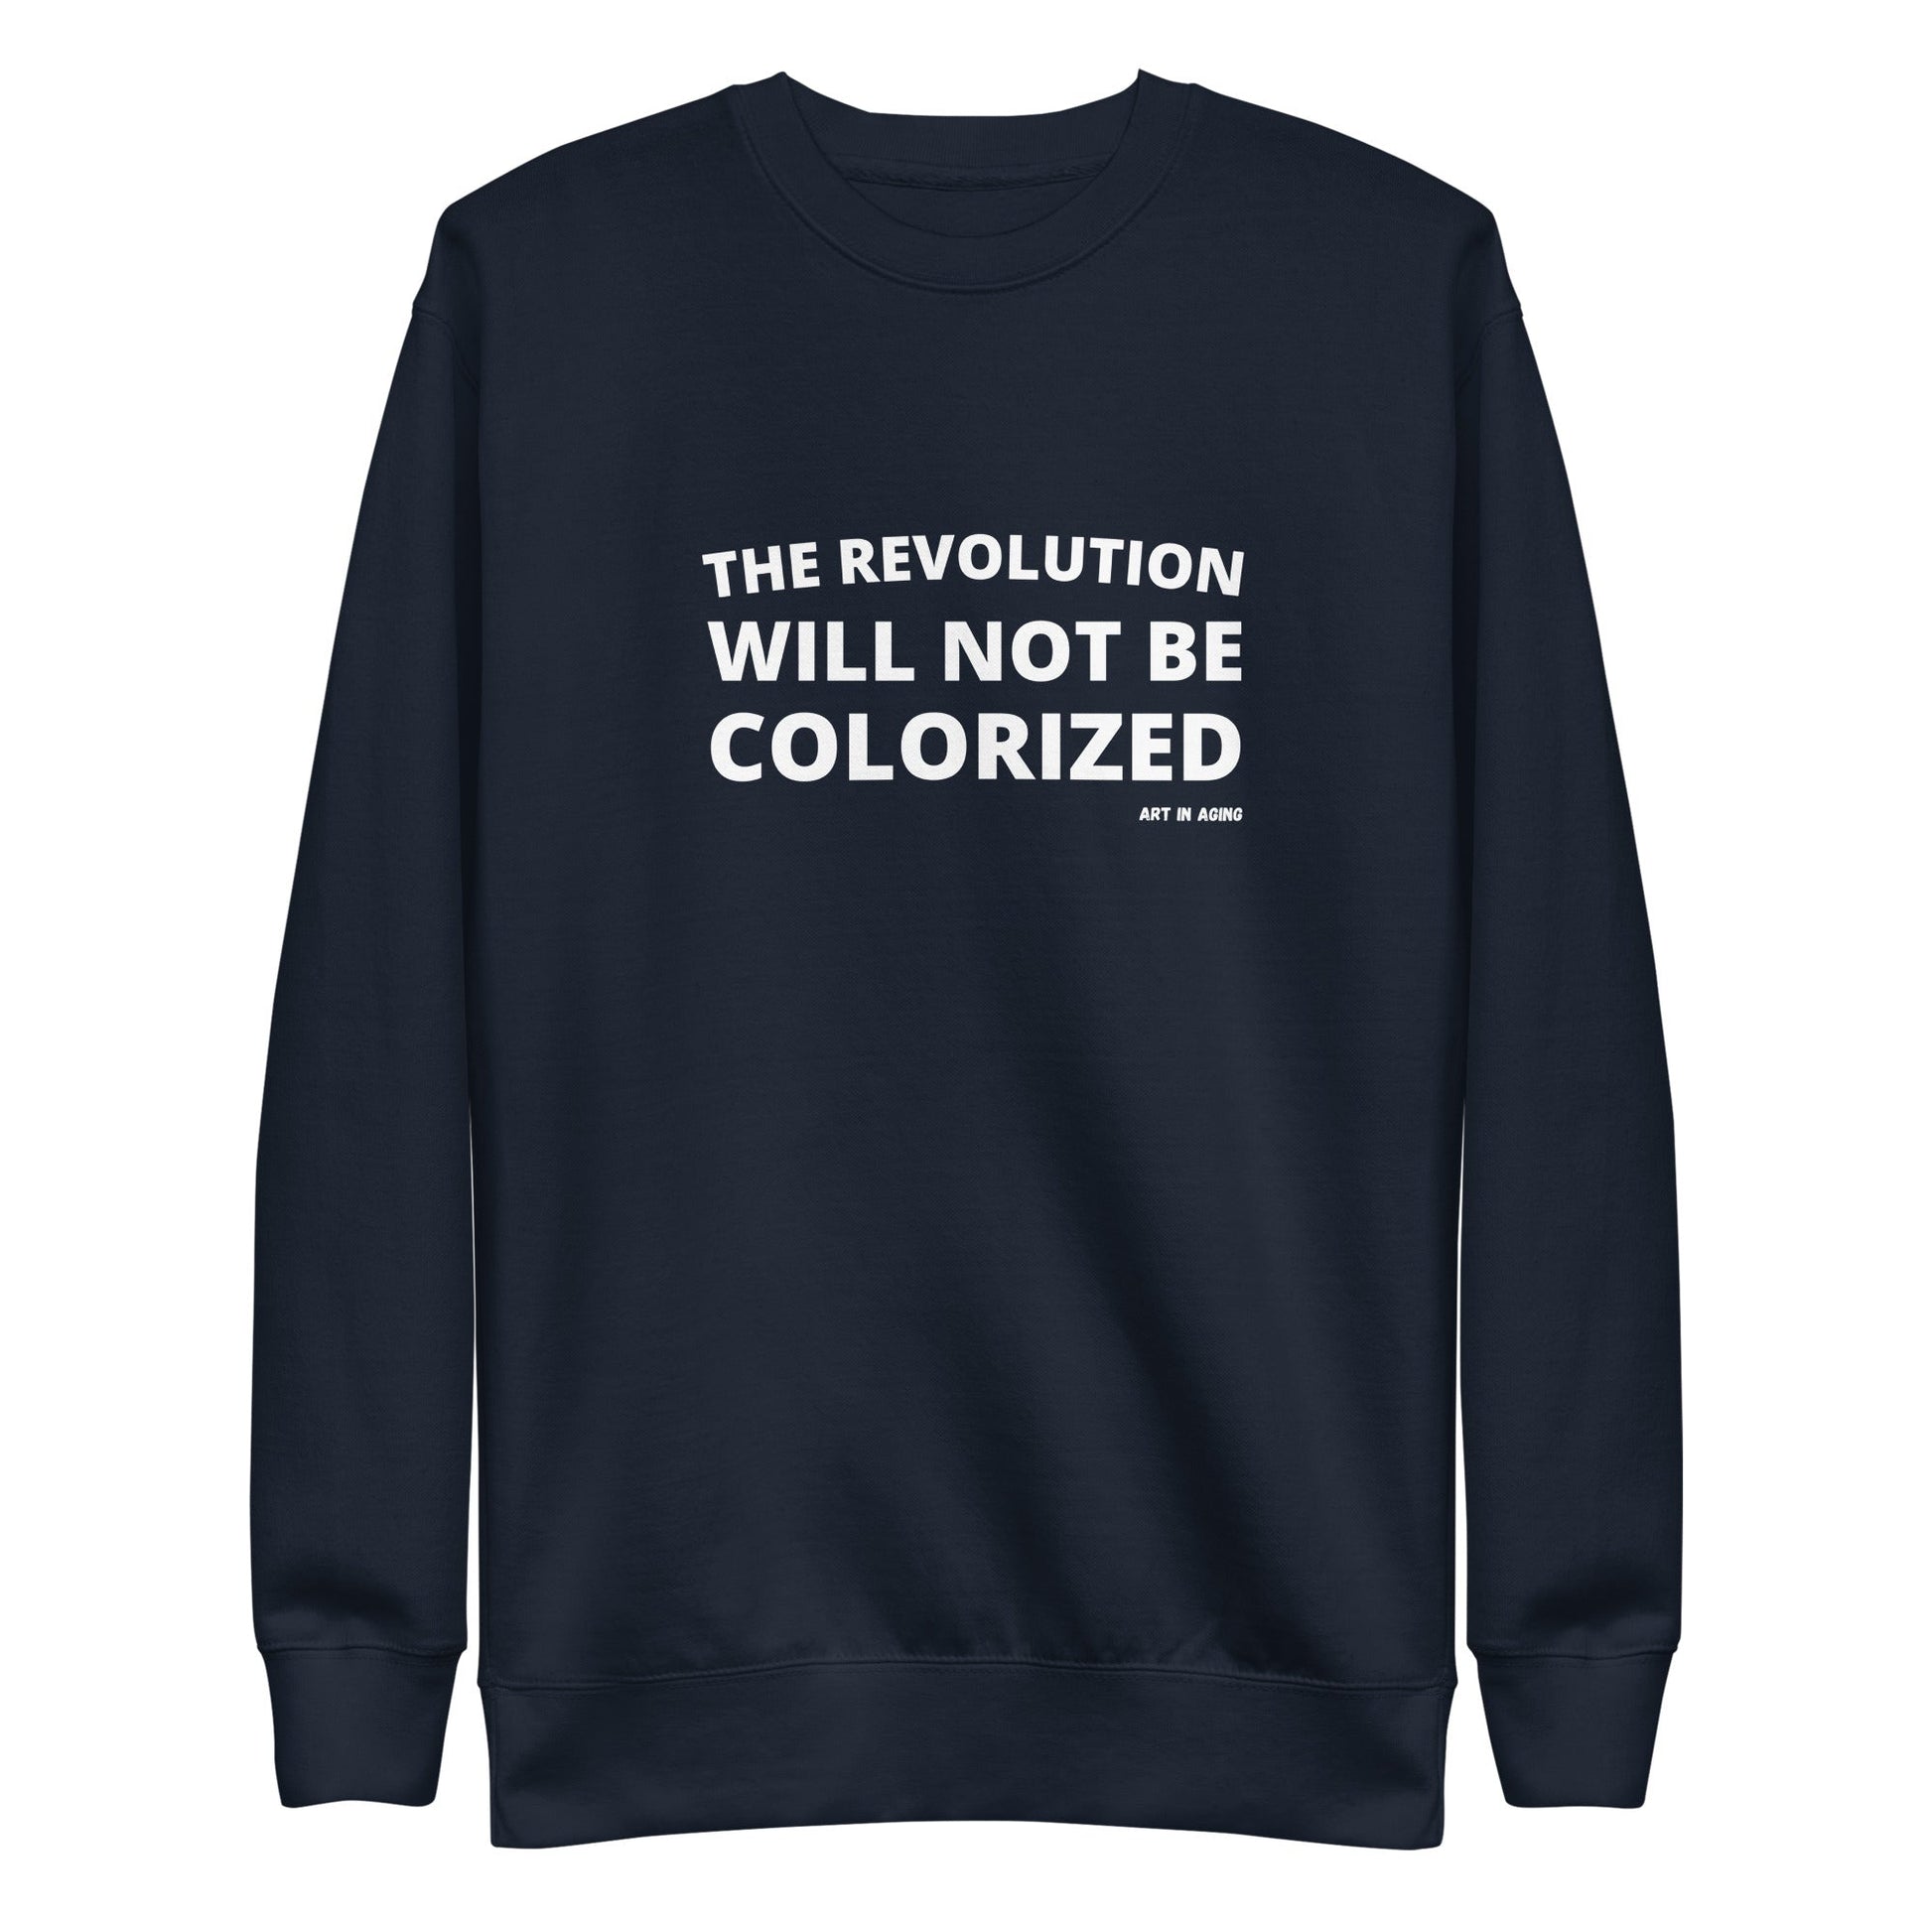 The Revolution Will Not Be Colorized Sweatshirt | Art in Aging